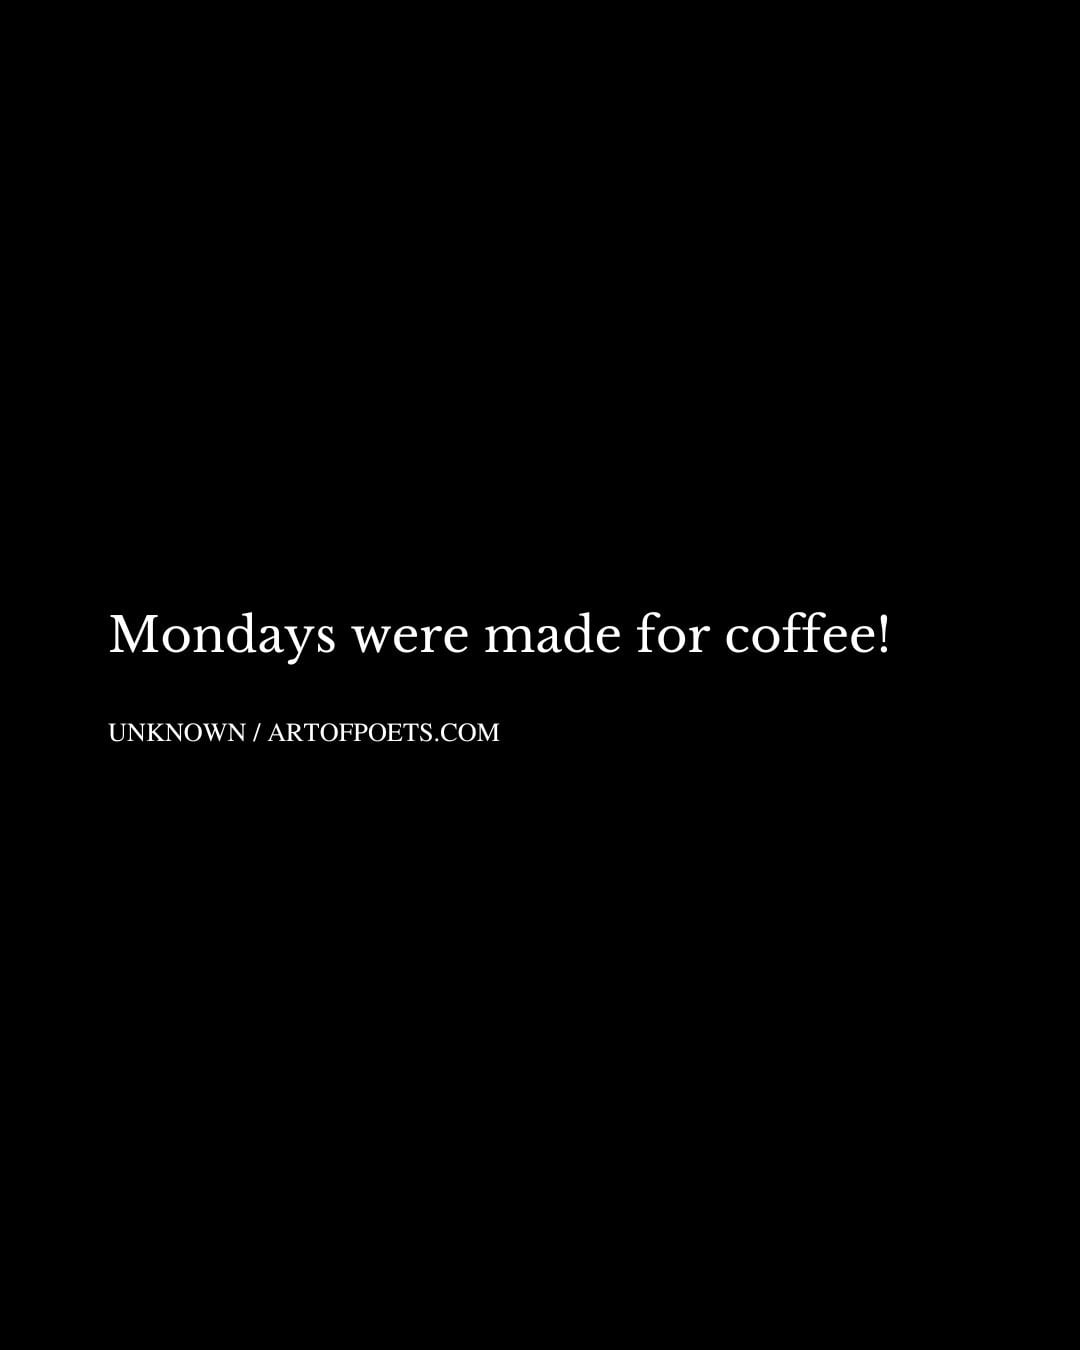 Mondays were made for coffee